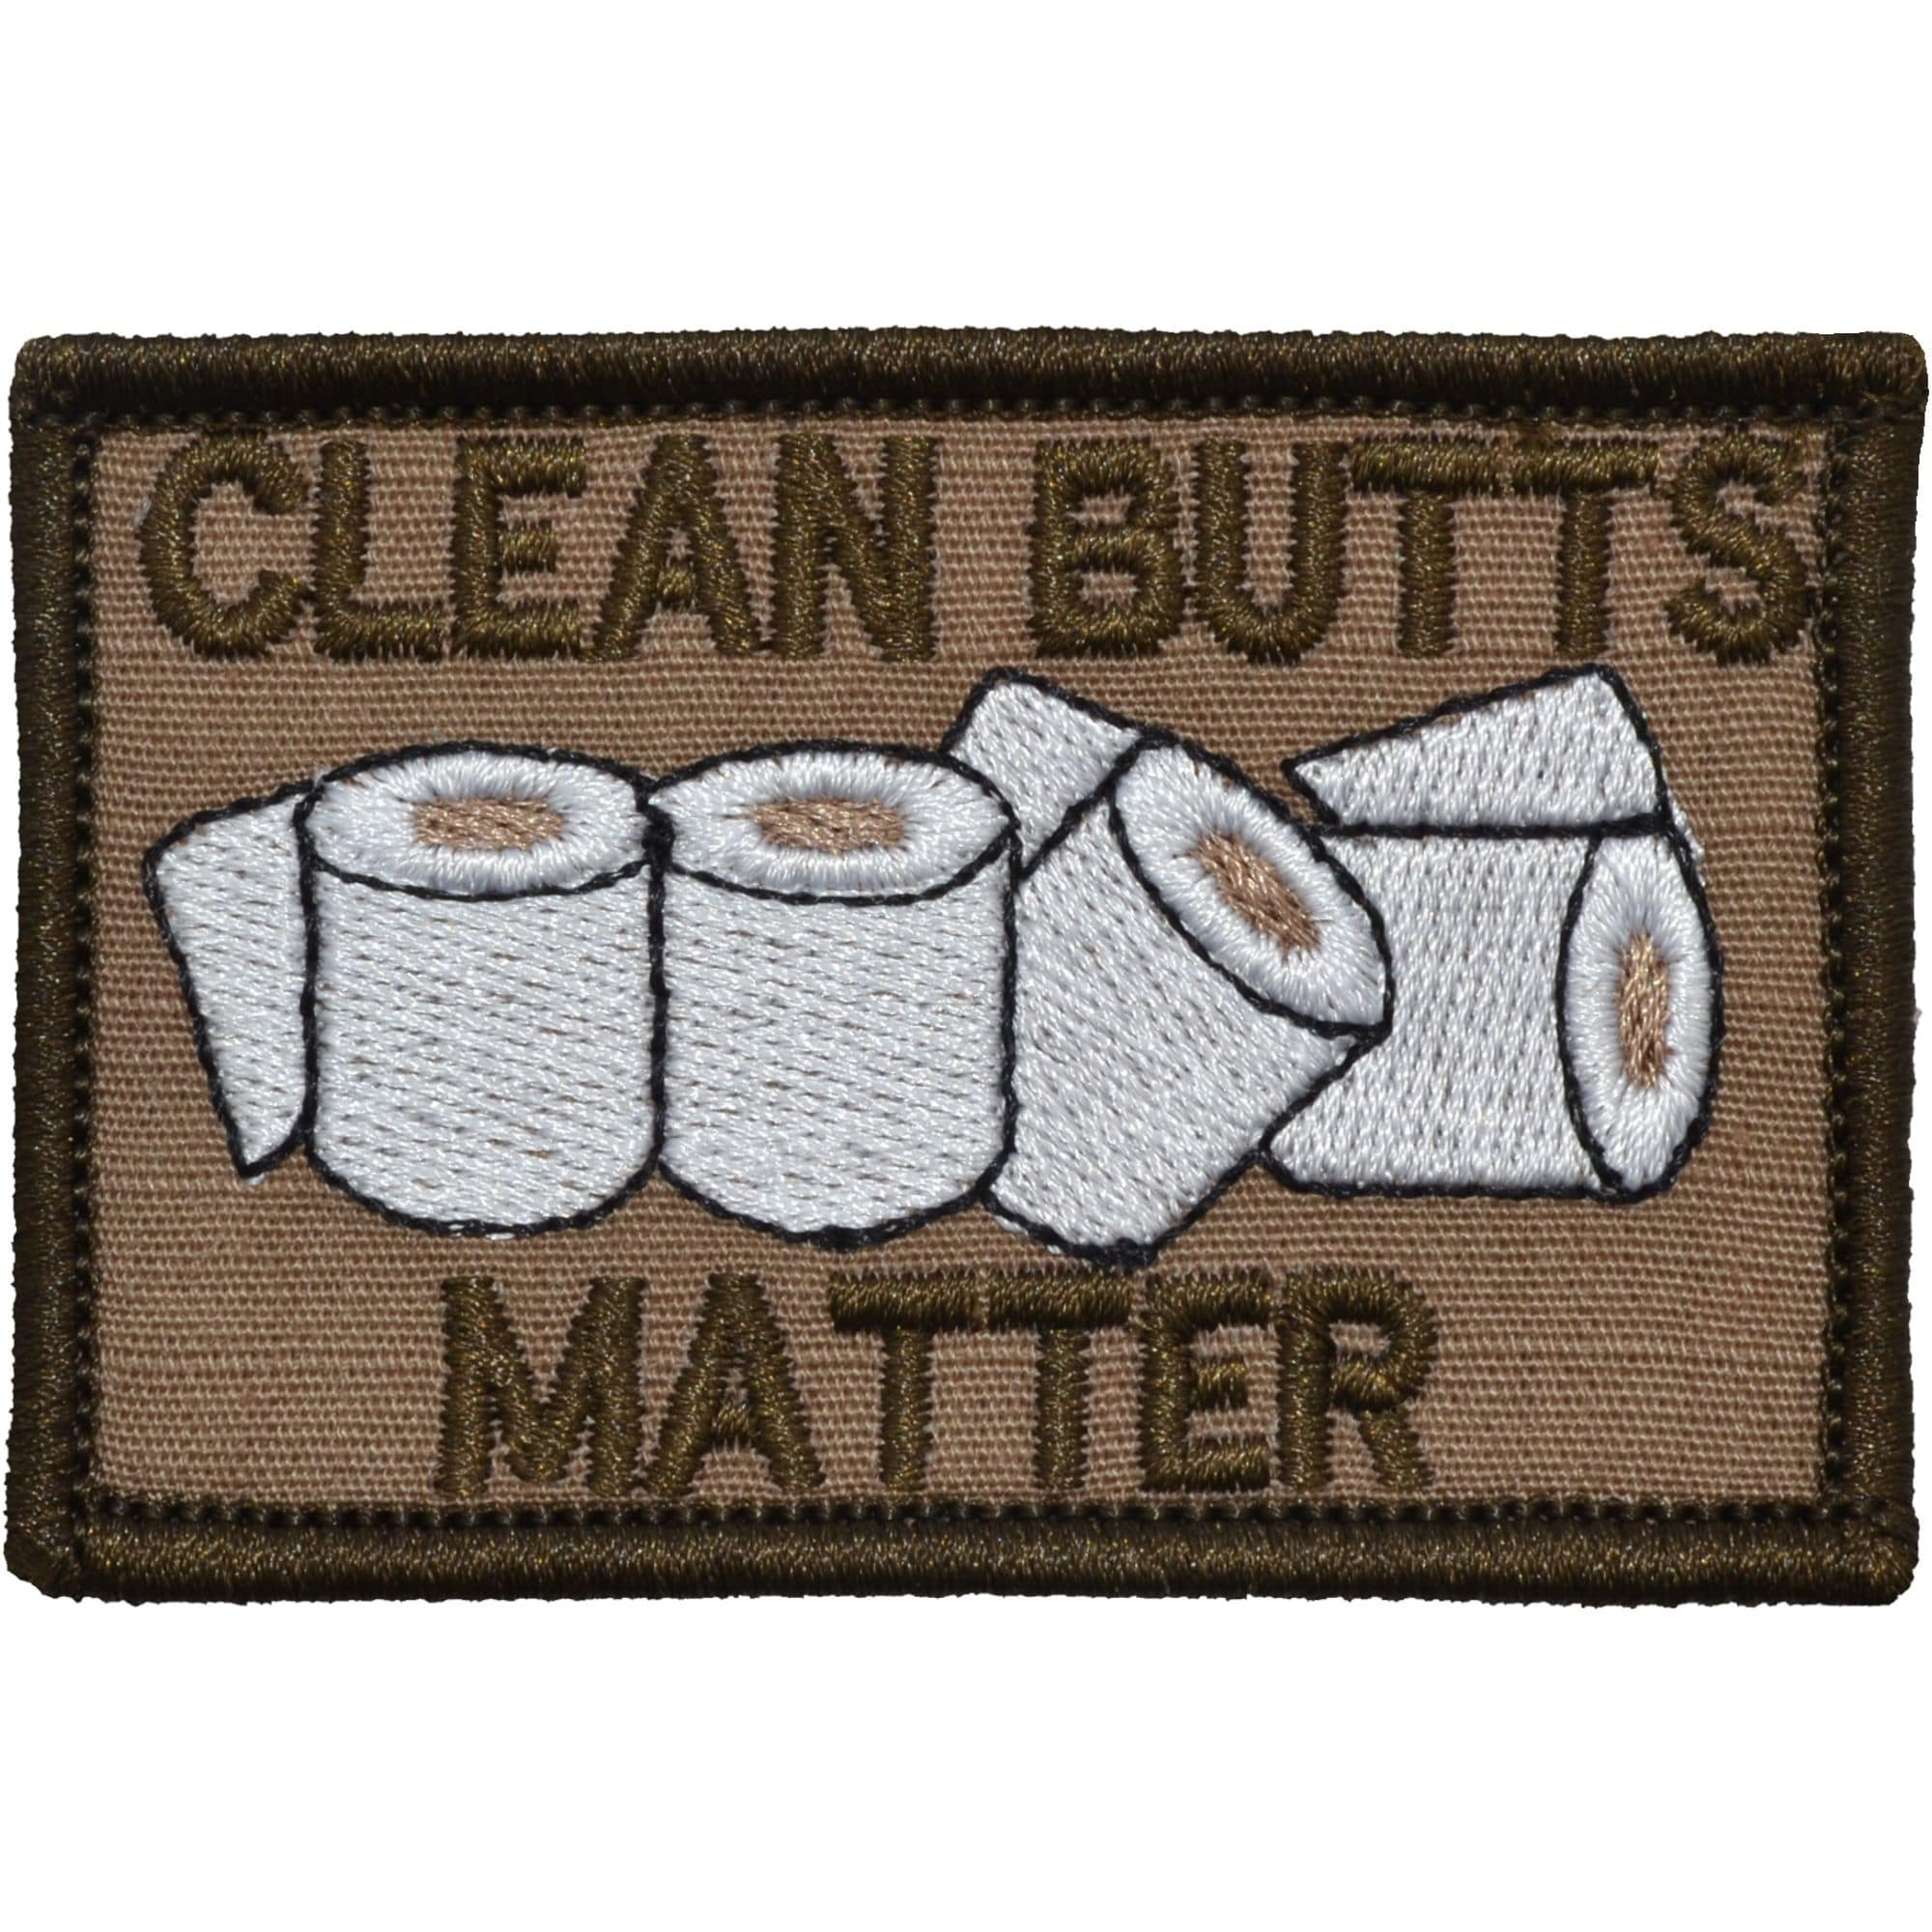 Clean Butts Matter - 2x3 Patch